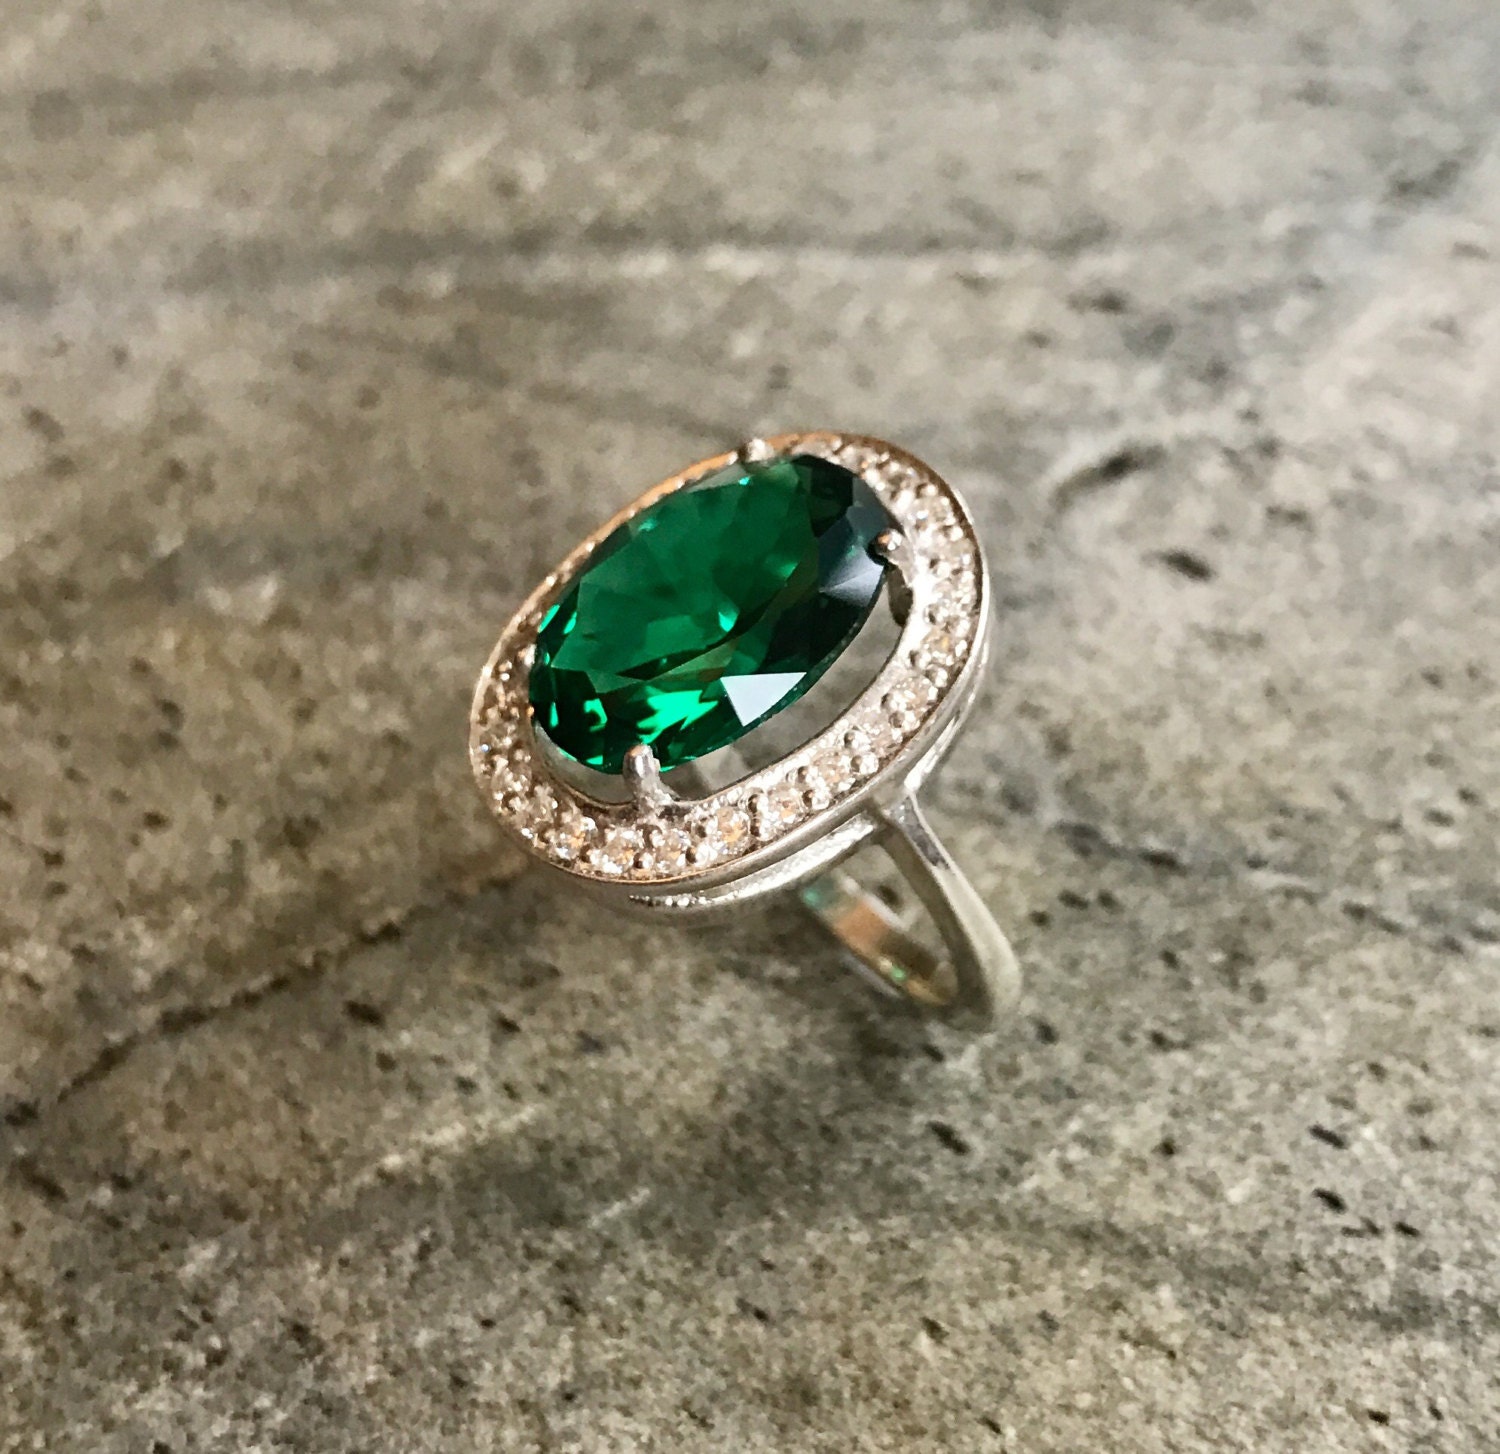 Emerald Ring Emerald Engagement Ring Created Emerald Vintage Emerald Ring Vintage Ring Antique Emerald Ring Antique Rings 925 Silver Ring